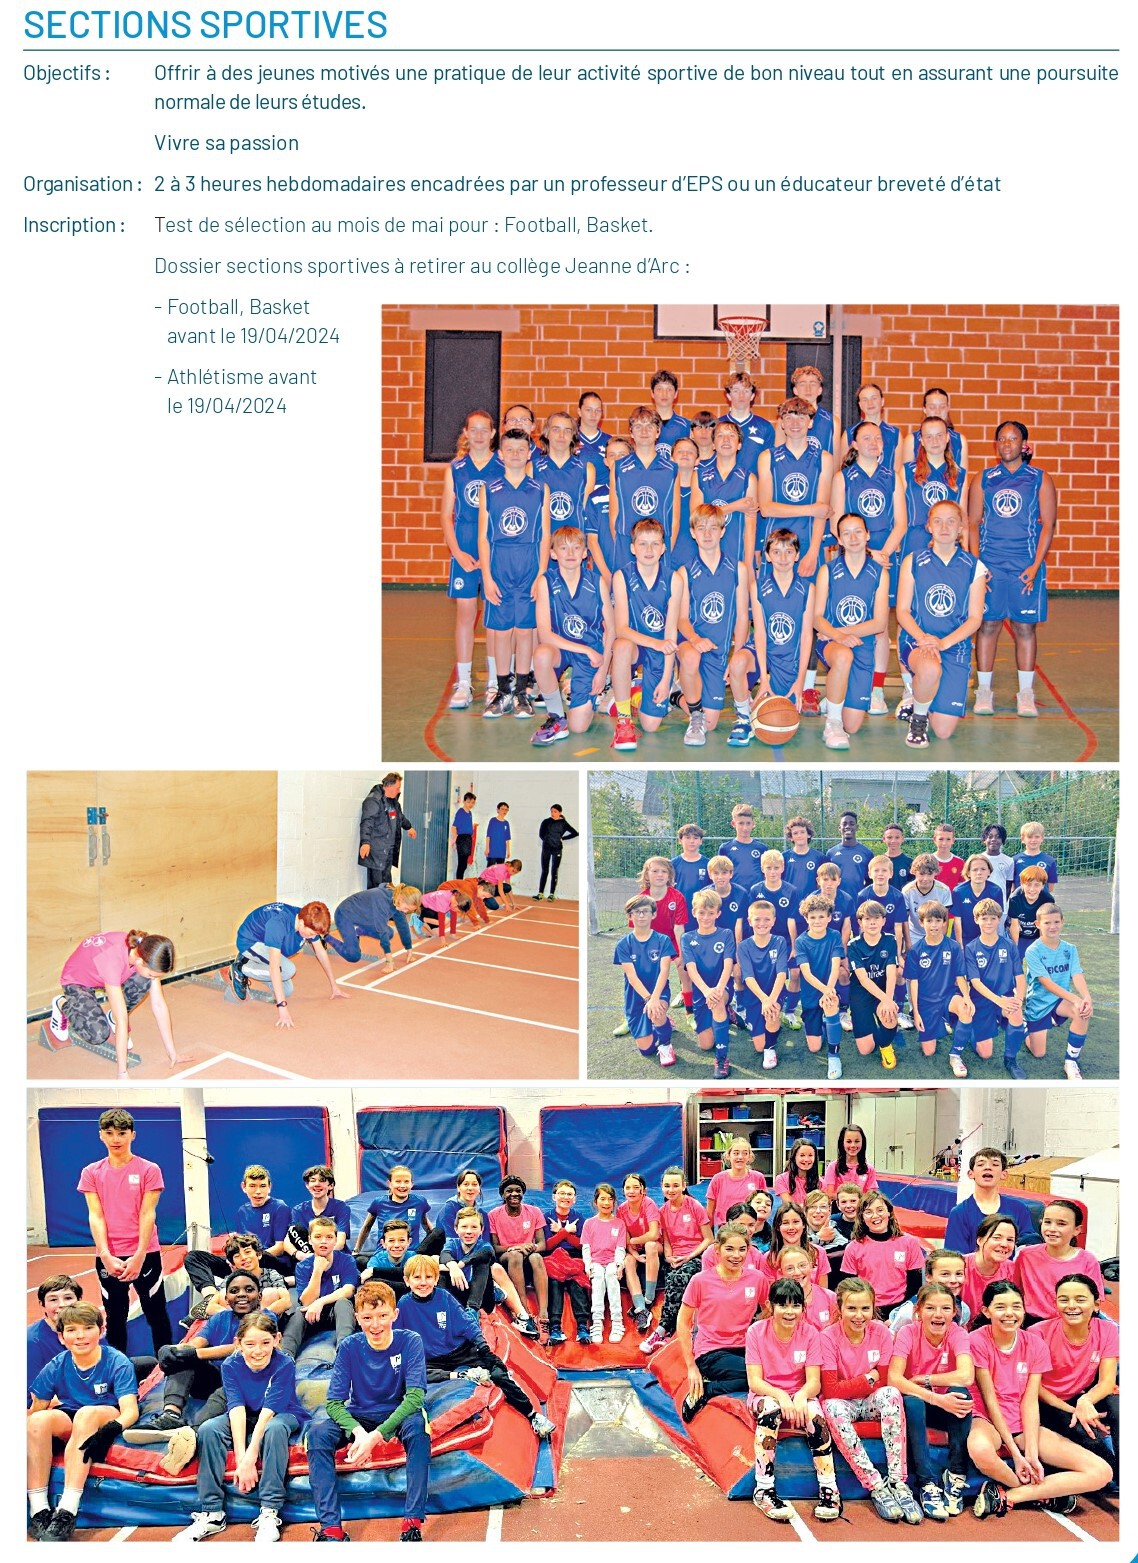 CLG - SECTIONS SPORTIVES